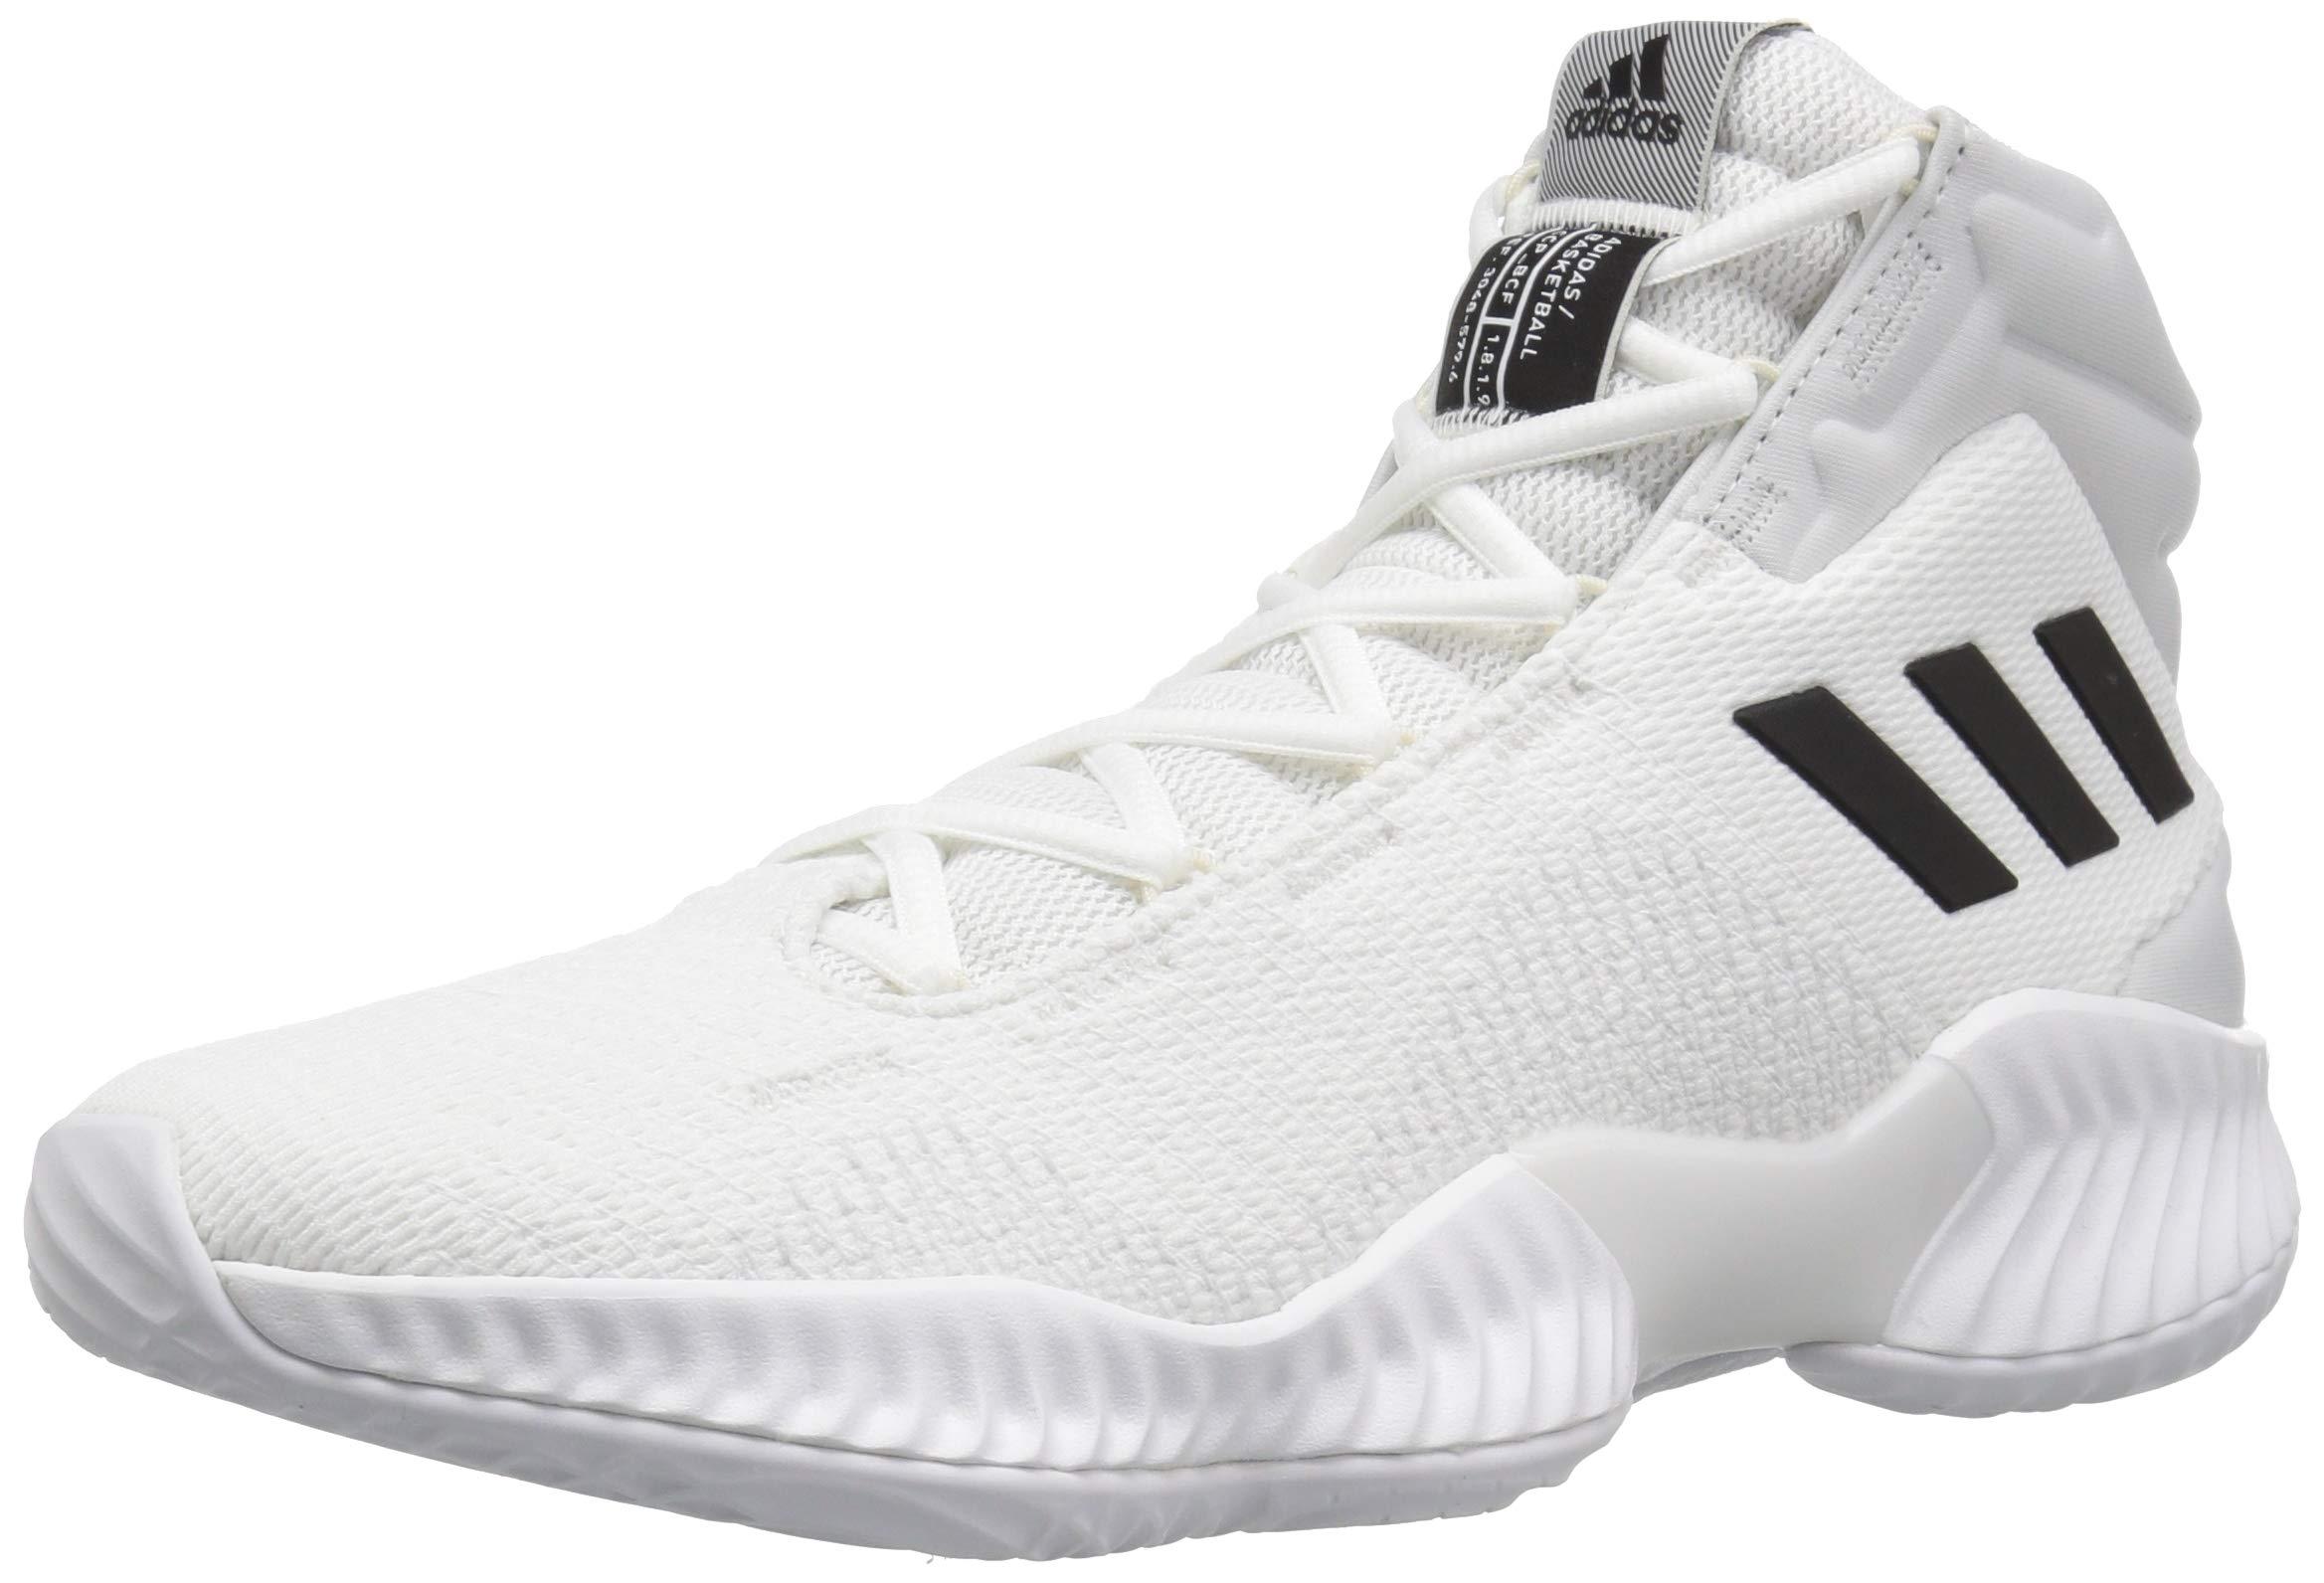 adidas Originals Pro Bounce 2018 Basketball Shoe in White/Black/Crystal ...